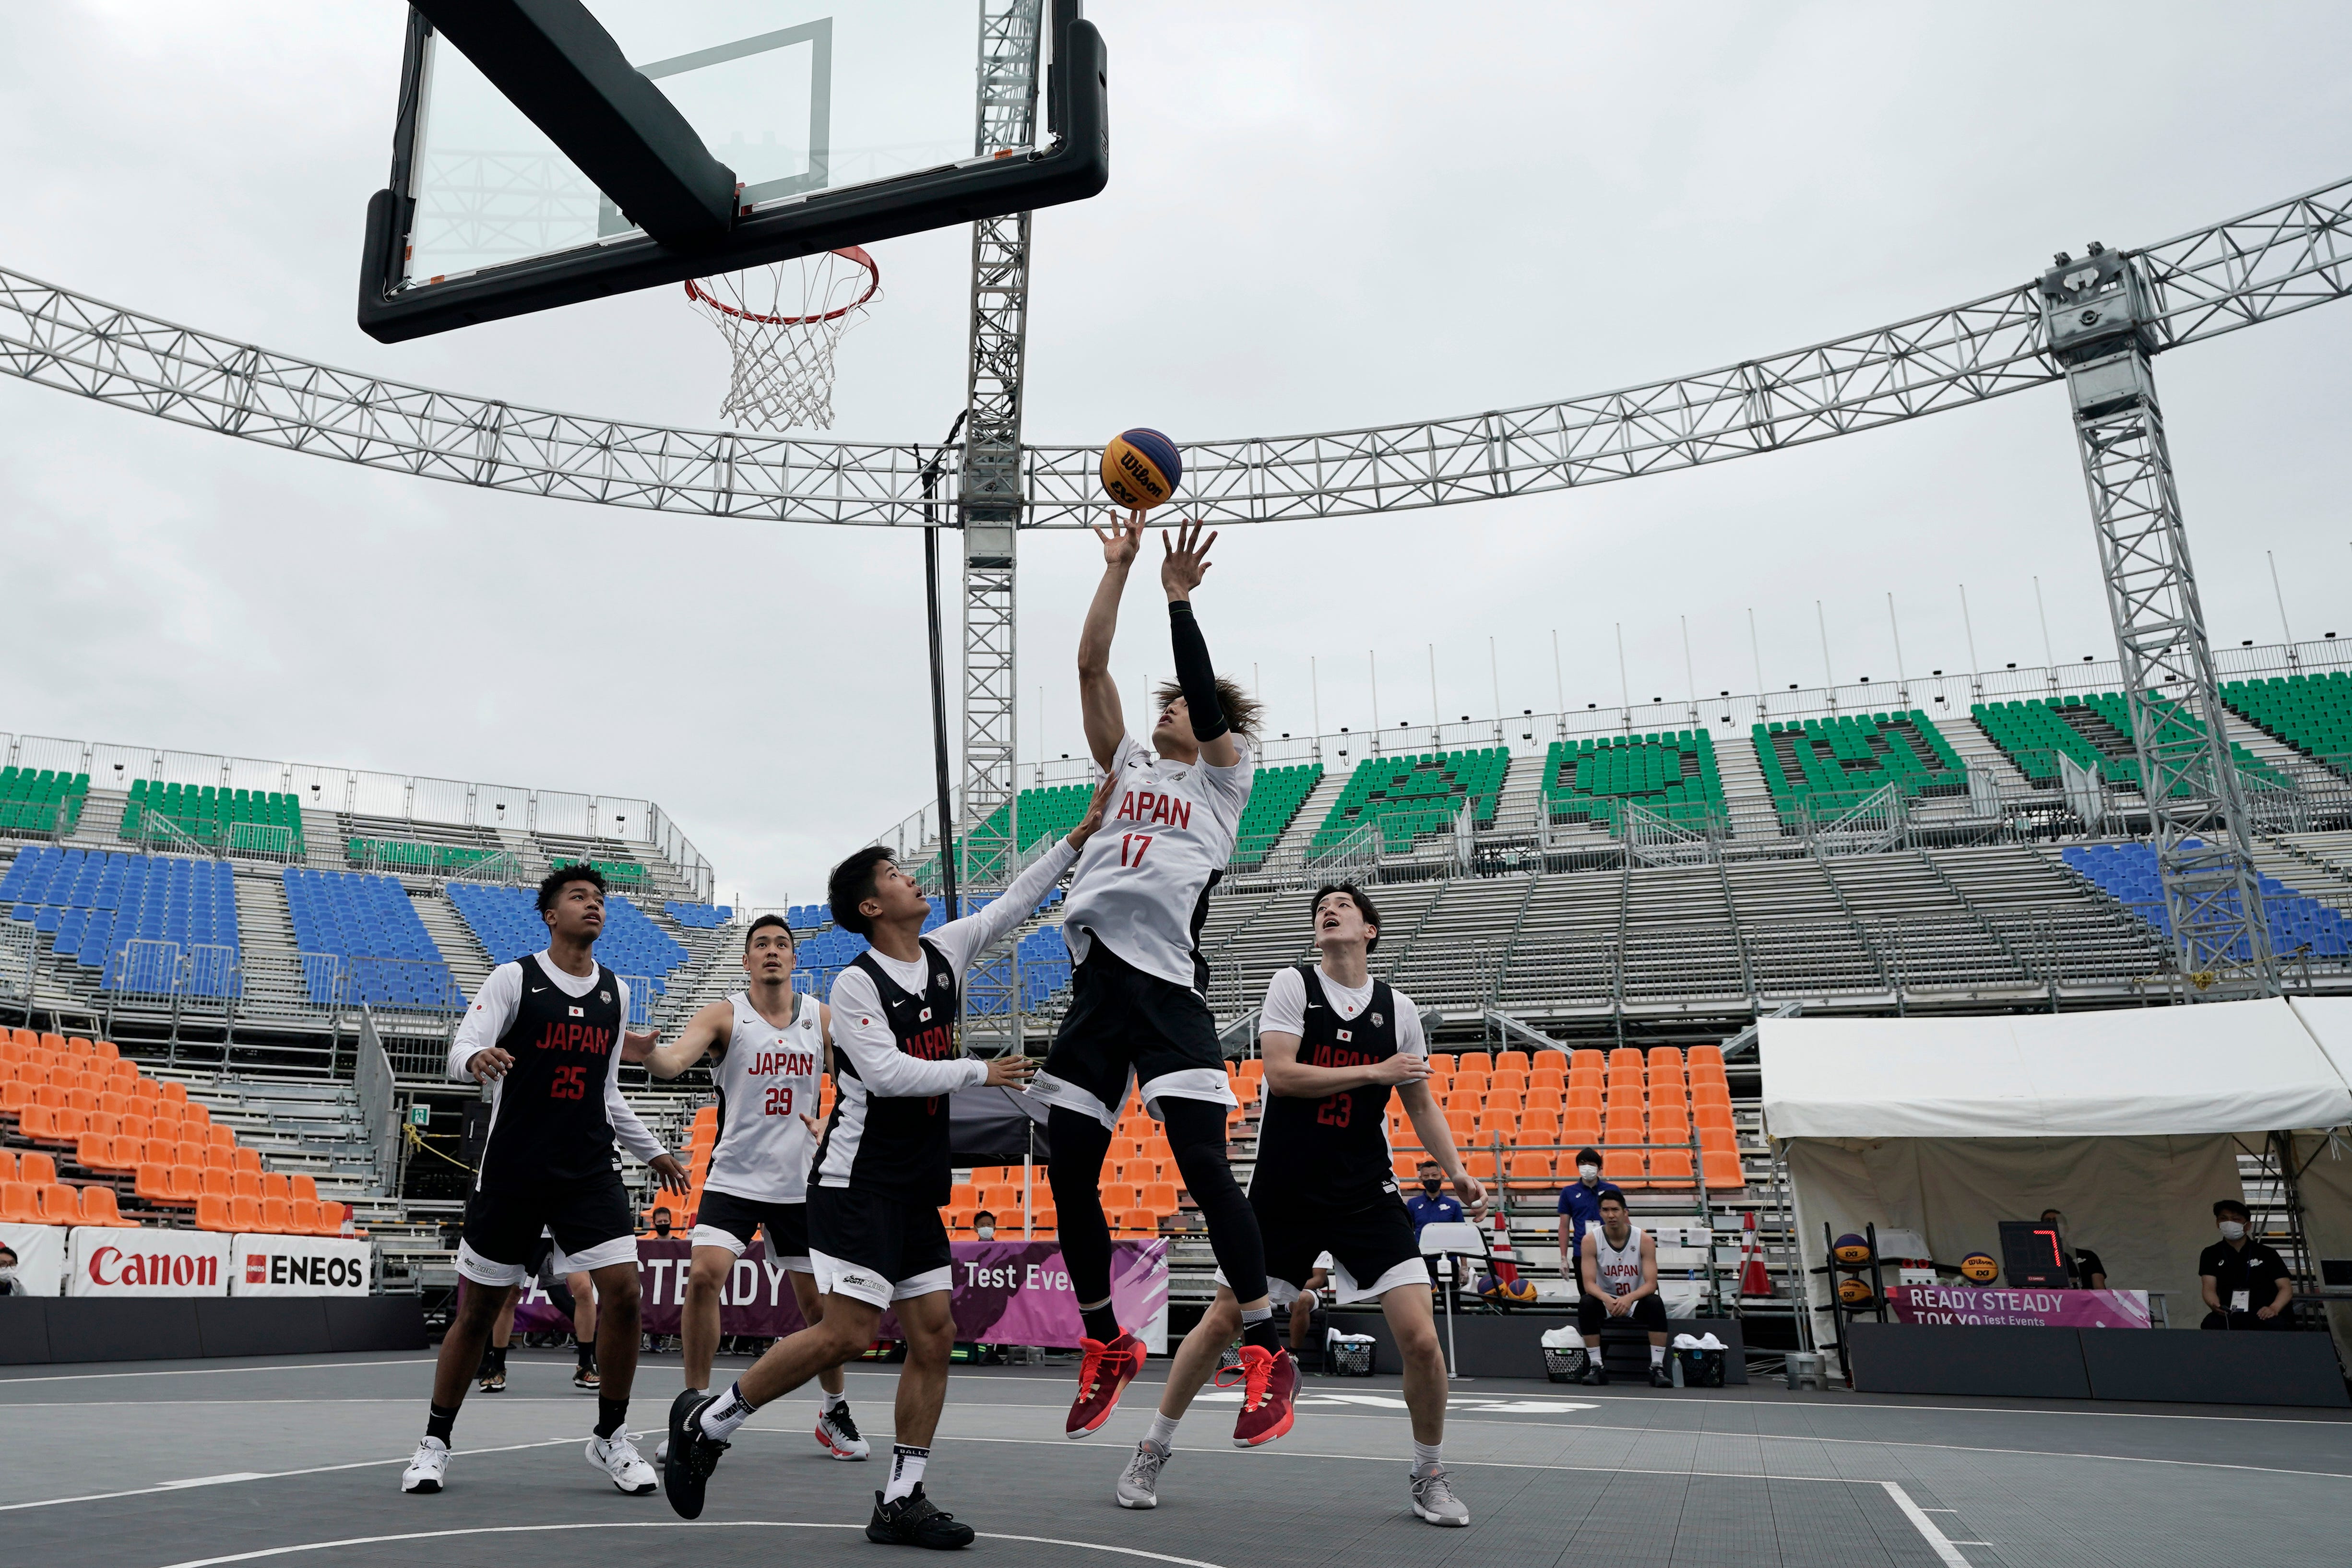 weduwe huwelijk Draad What are rules, format for 2021 Olympics 3-on-3 basketball?